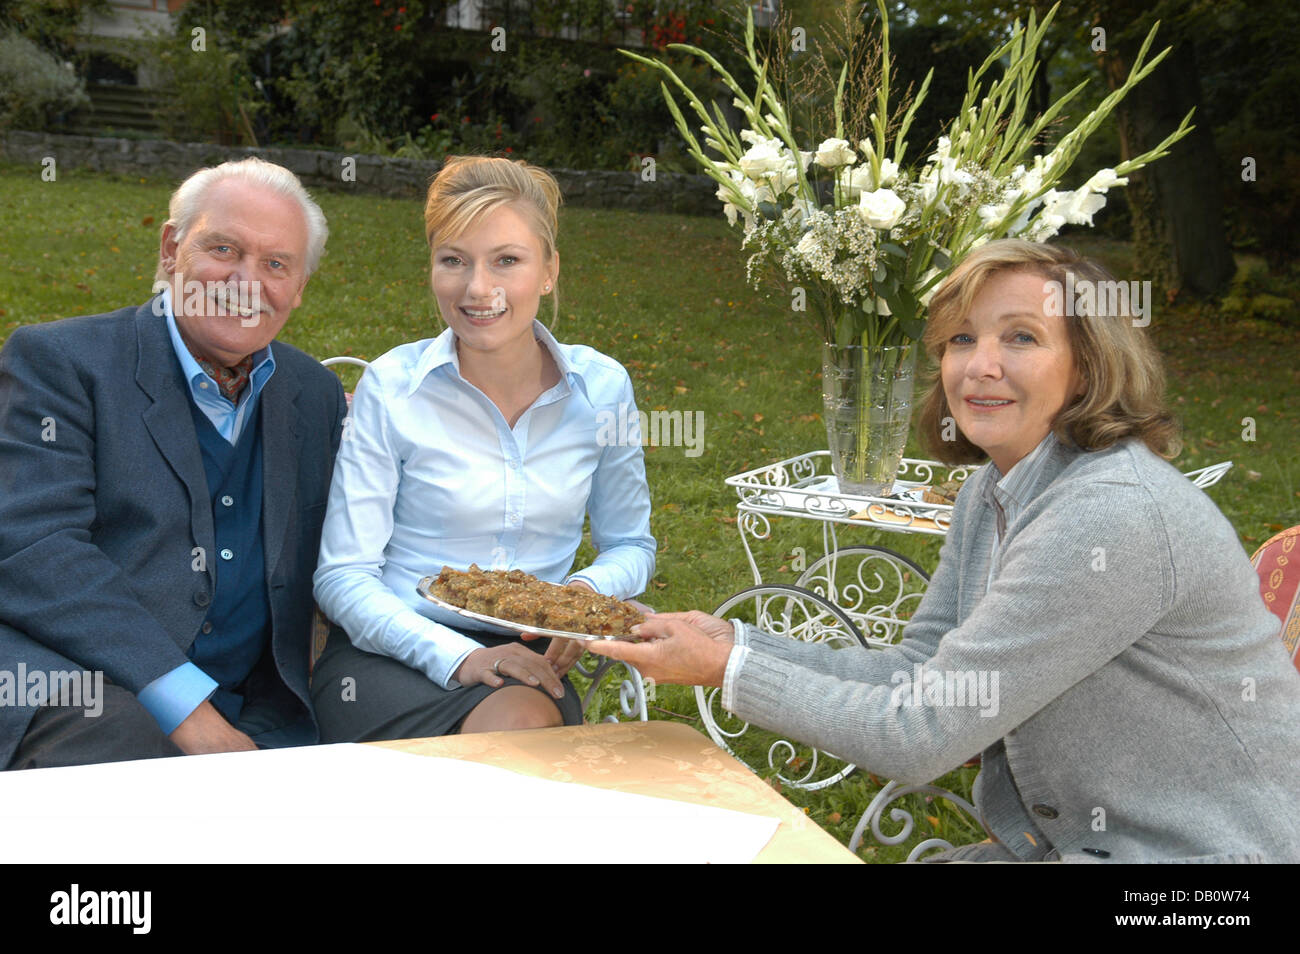 German actors (L-R) Wolfgang Huebsch as Herbert Reichenbacher, Johanna Christine Gehlen as Laura Althoff and Gila von Weitersahausen as Lotte Reichenbach pose during the shooting of TV sequel 'Lily Schoenauer: For ever and a day' in Deutschlandsberg, Austria, 26 September 2007. The TV film is a co-production of Bavaria Film, Graf Film, ARD/Degeto and ORF sponsored by the television Stock Photo